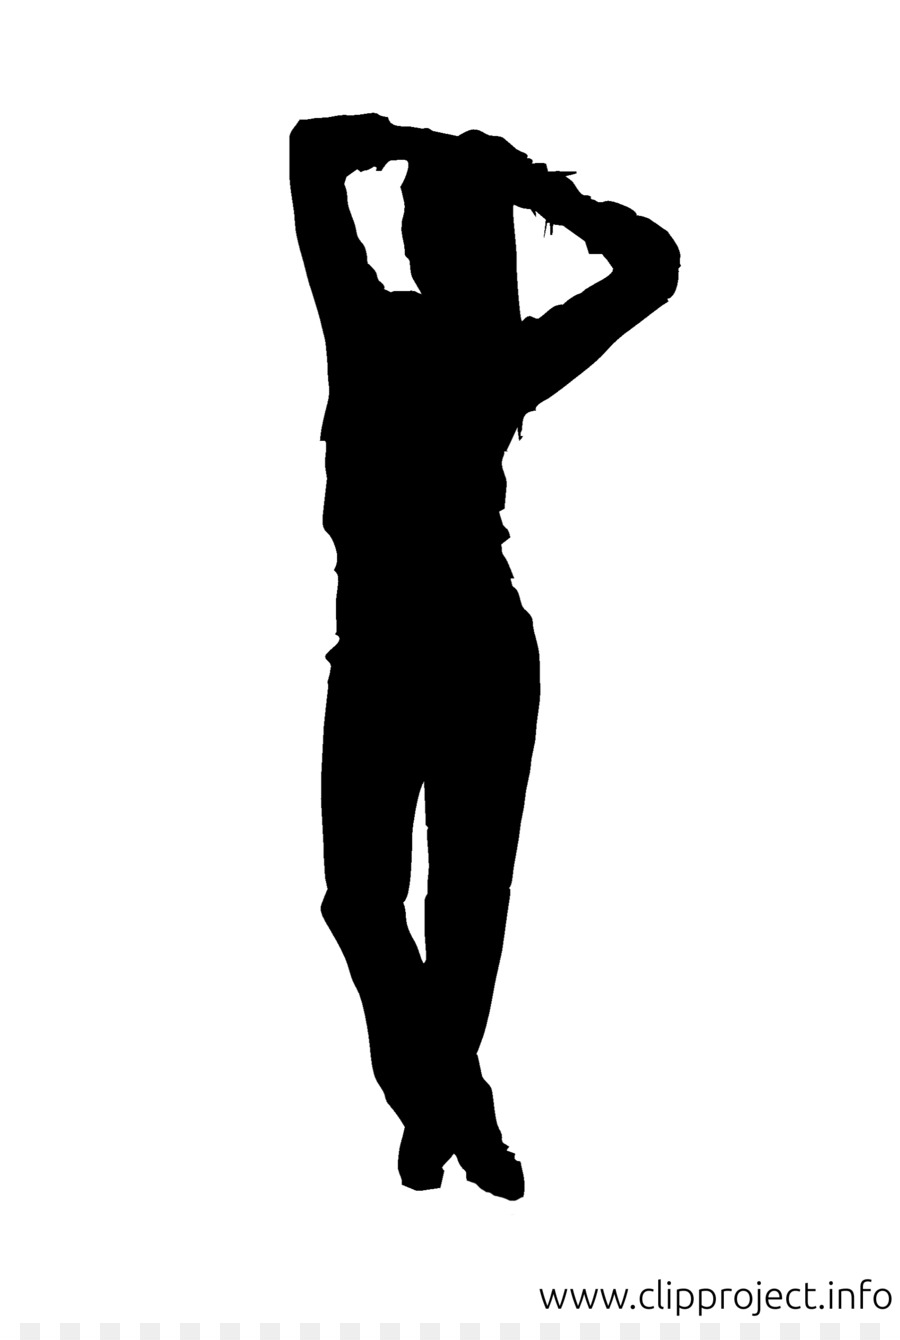 Physical fitness Physical exercise Silhouette Clip art - Exercise Silhouette Cliparts png download - 1701*2500 - Free Transparent  png Download.